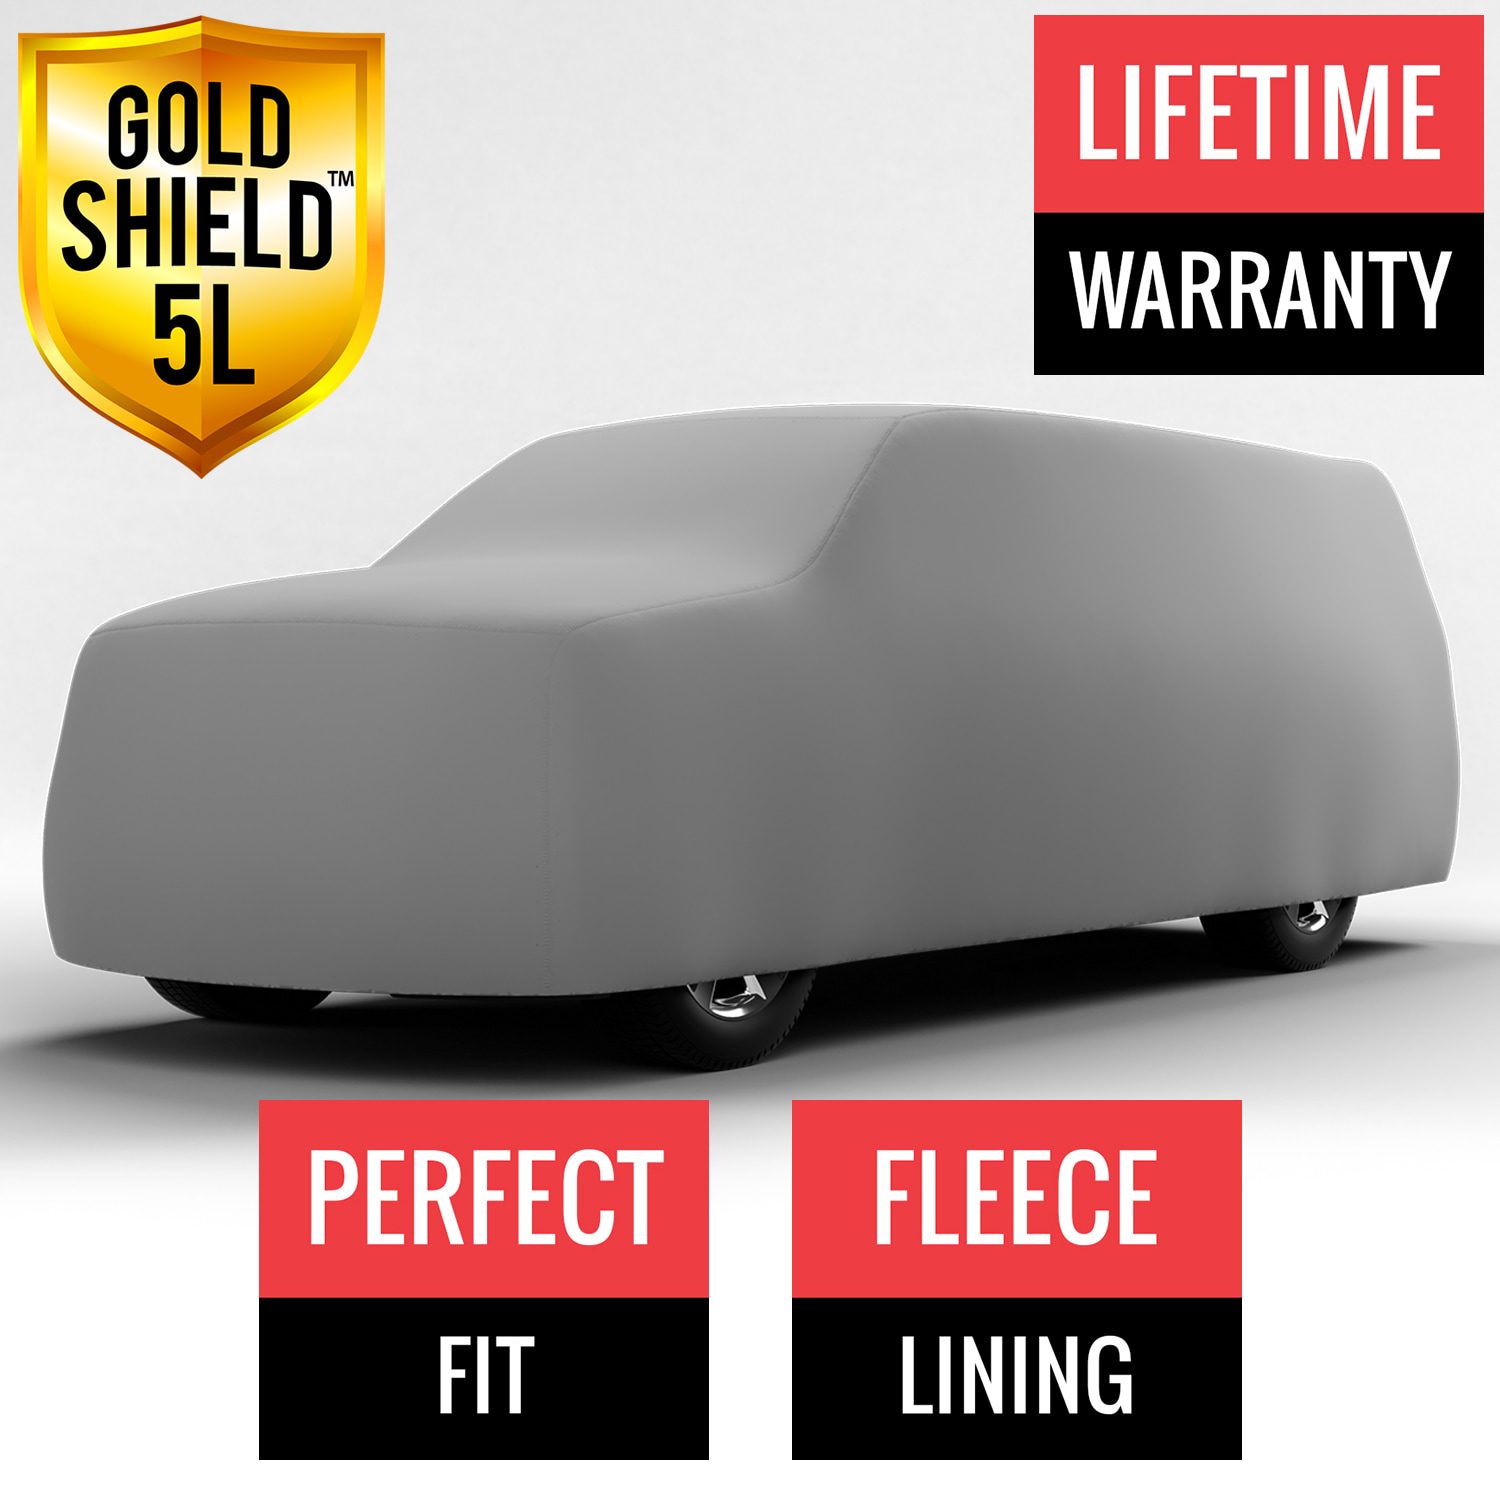 Gold Shield 5L - Car Cover for Toyota Pickup 1984 Regular Cab Pickup Long Bed with Camper Shell